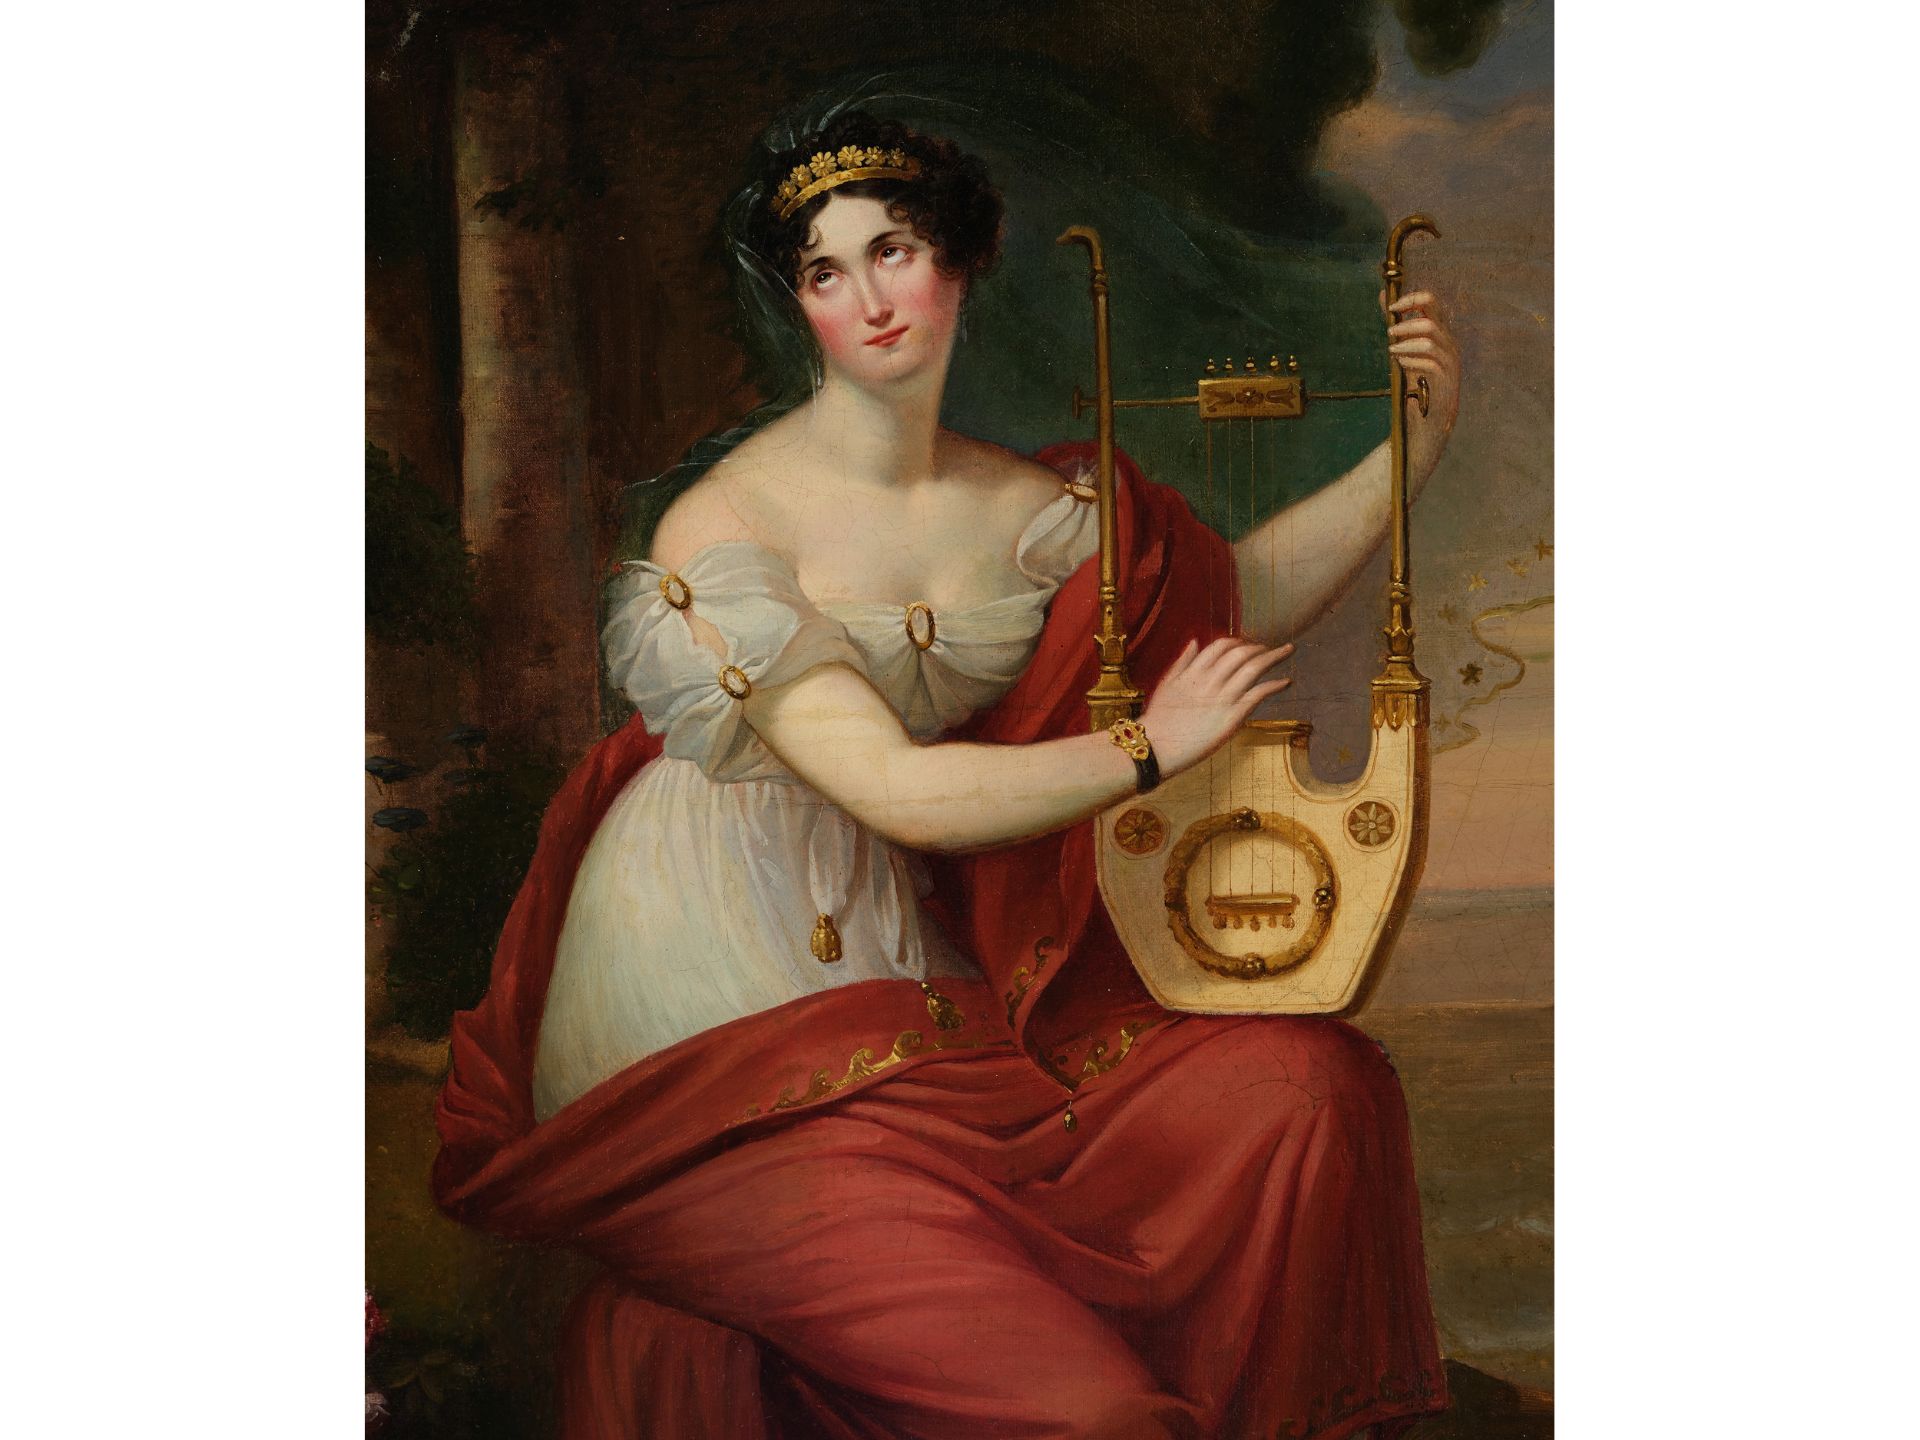 Classicist artist, Lady with lyre, Around 1800 - Image 3 of 7